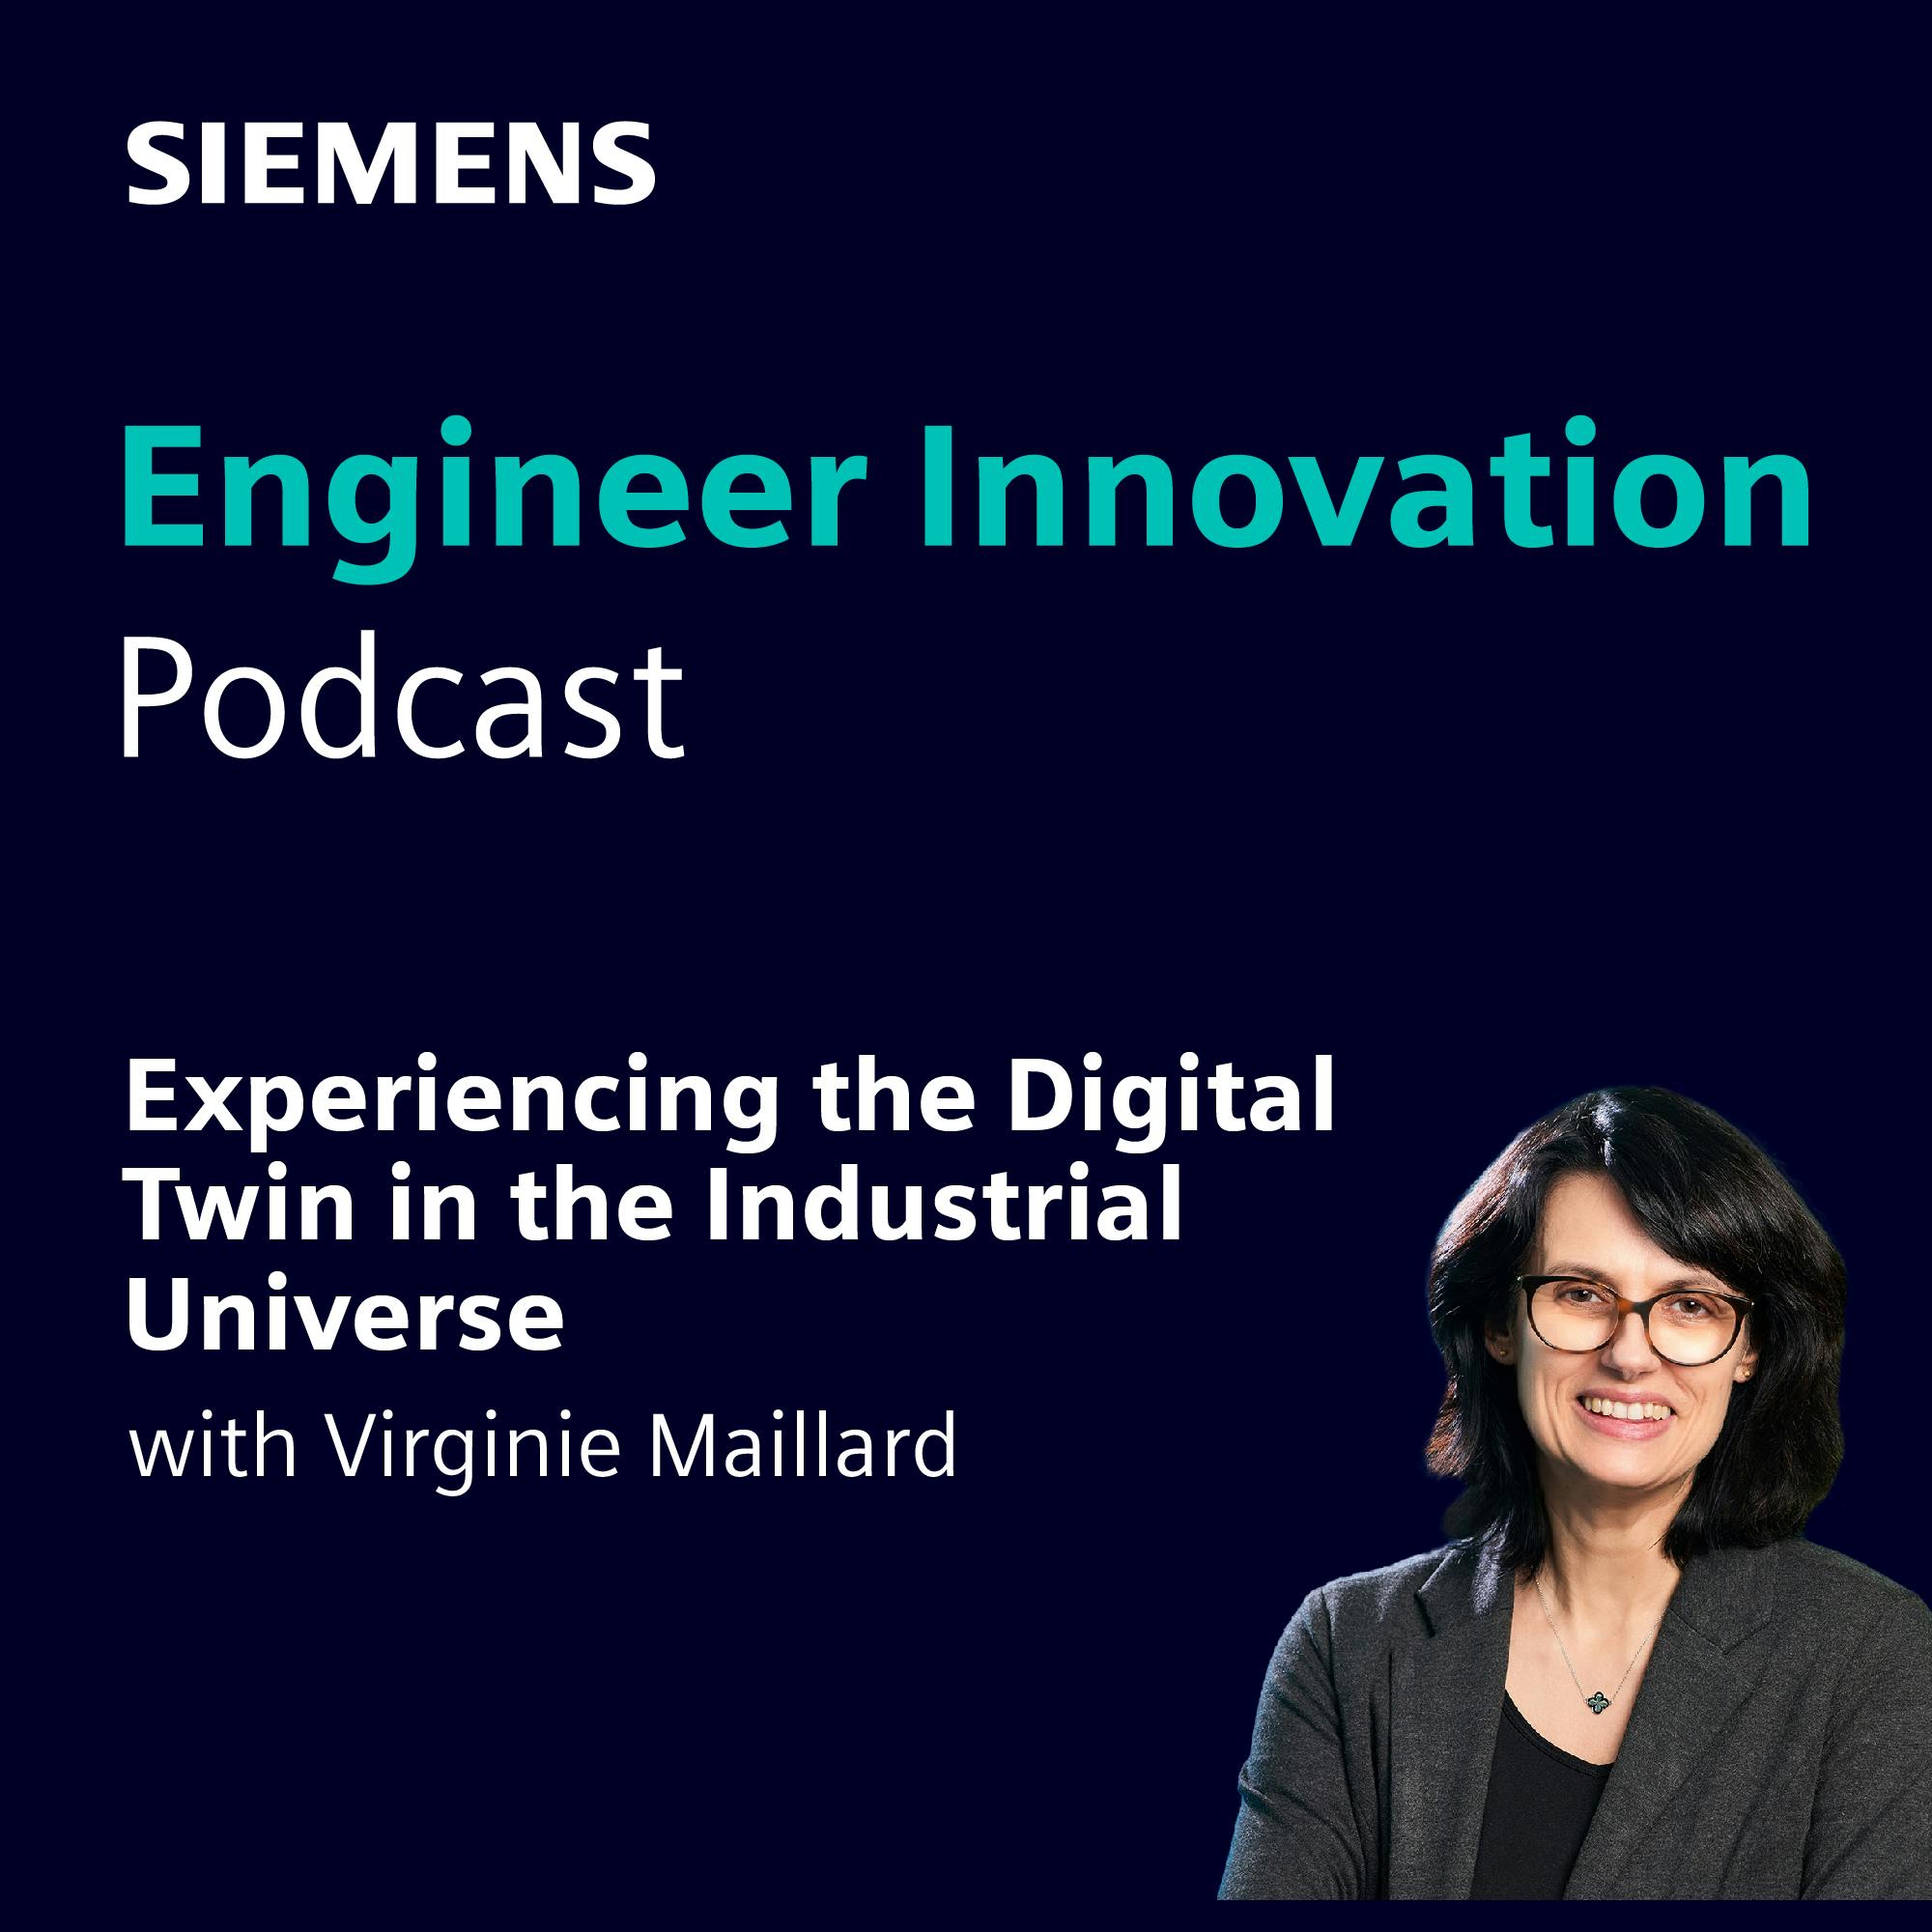 Experiencing the Digital Twin in the Industrial Universe